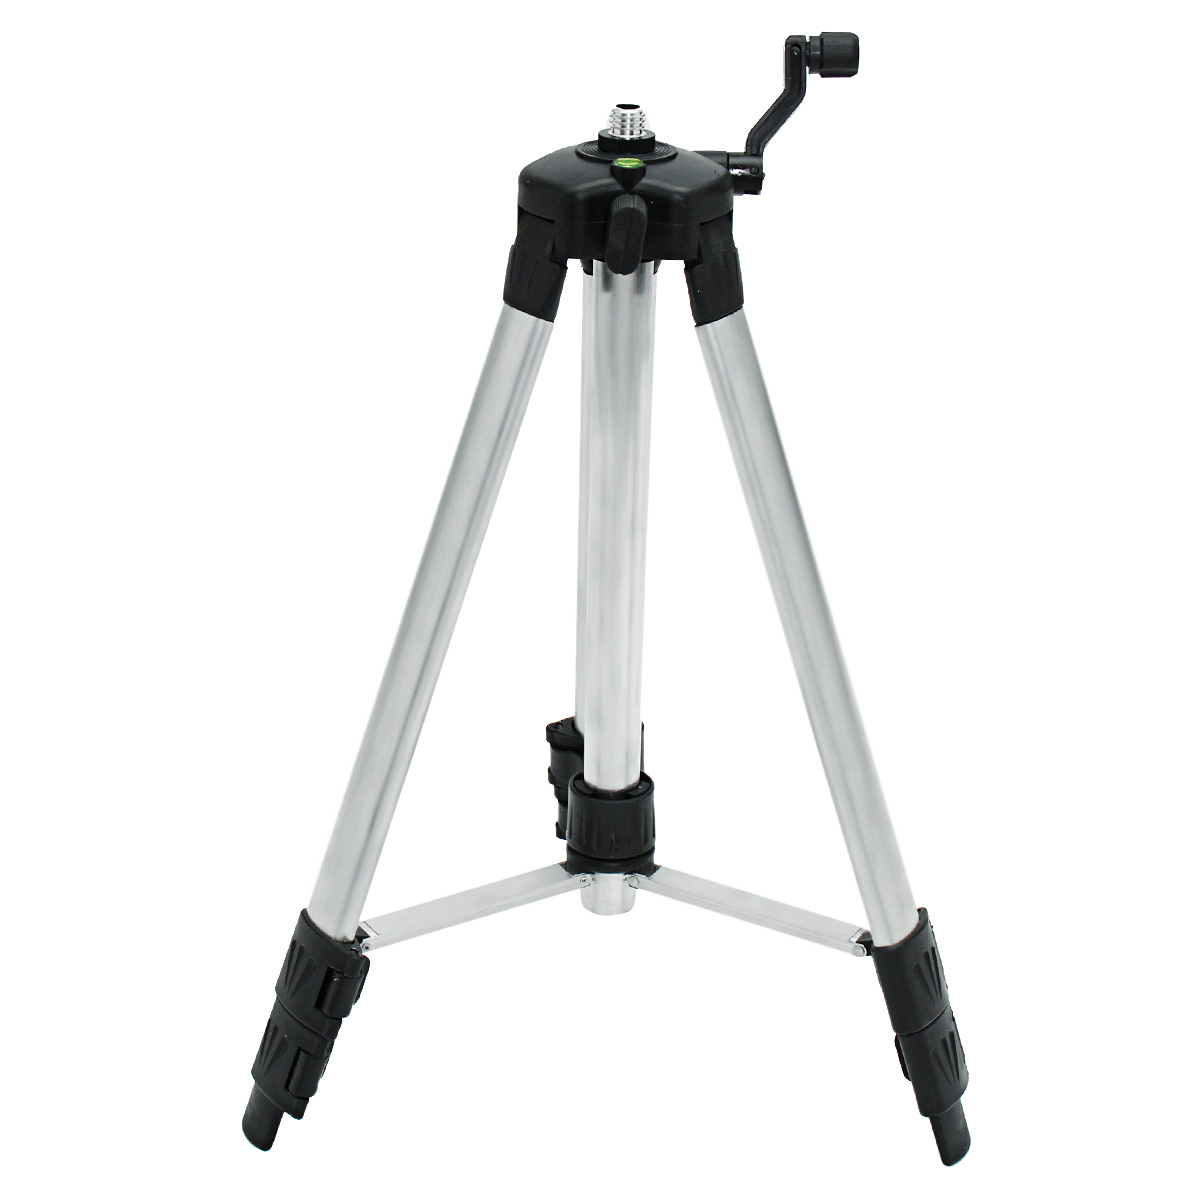 Professional-Tripod-Adjustable-for-Rotary-Laser-Leveling-Measuring-Tool-Instruments-Line-Level-Exten-1616473-7